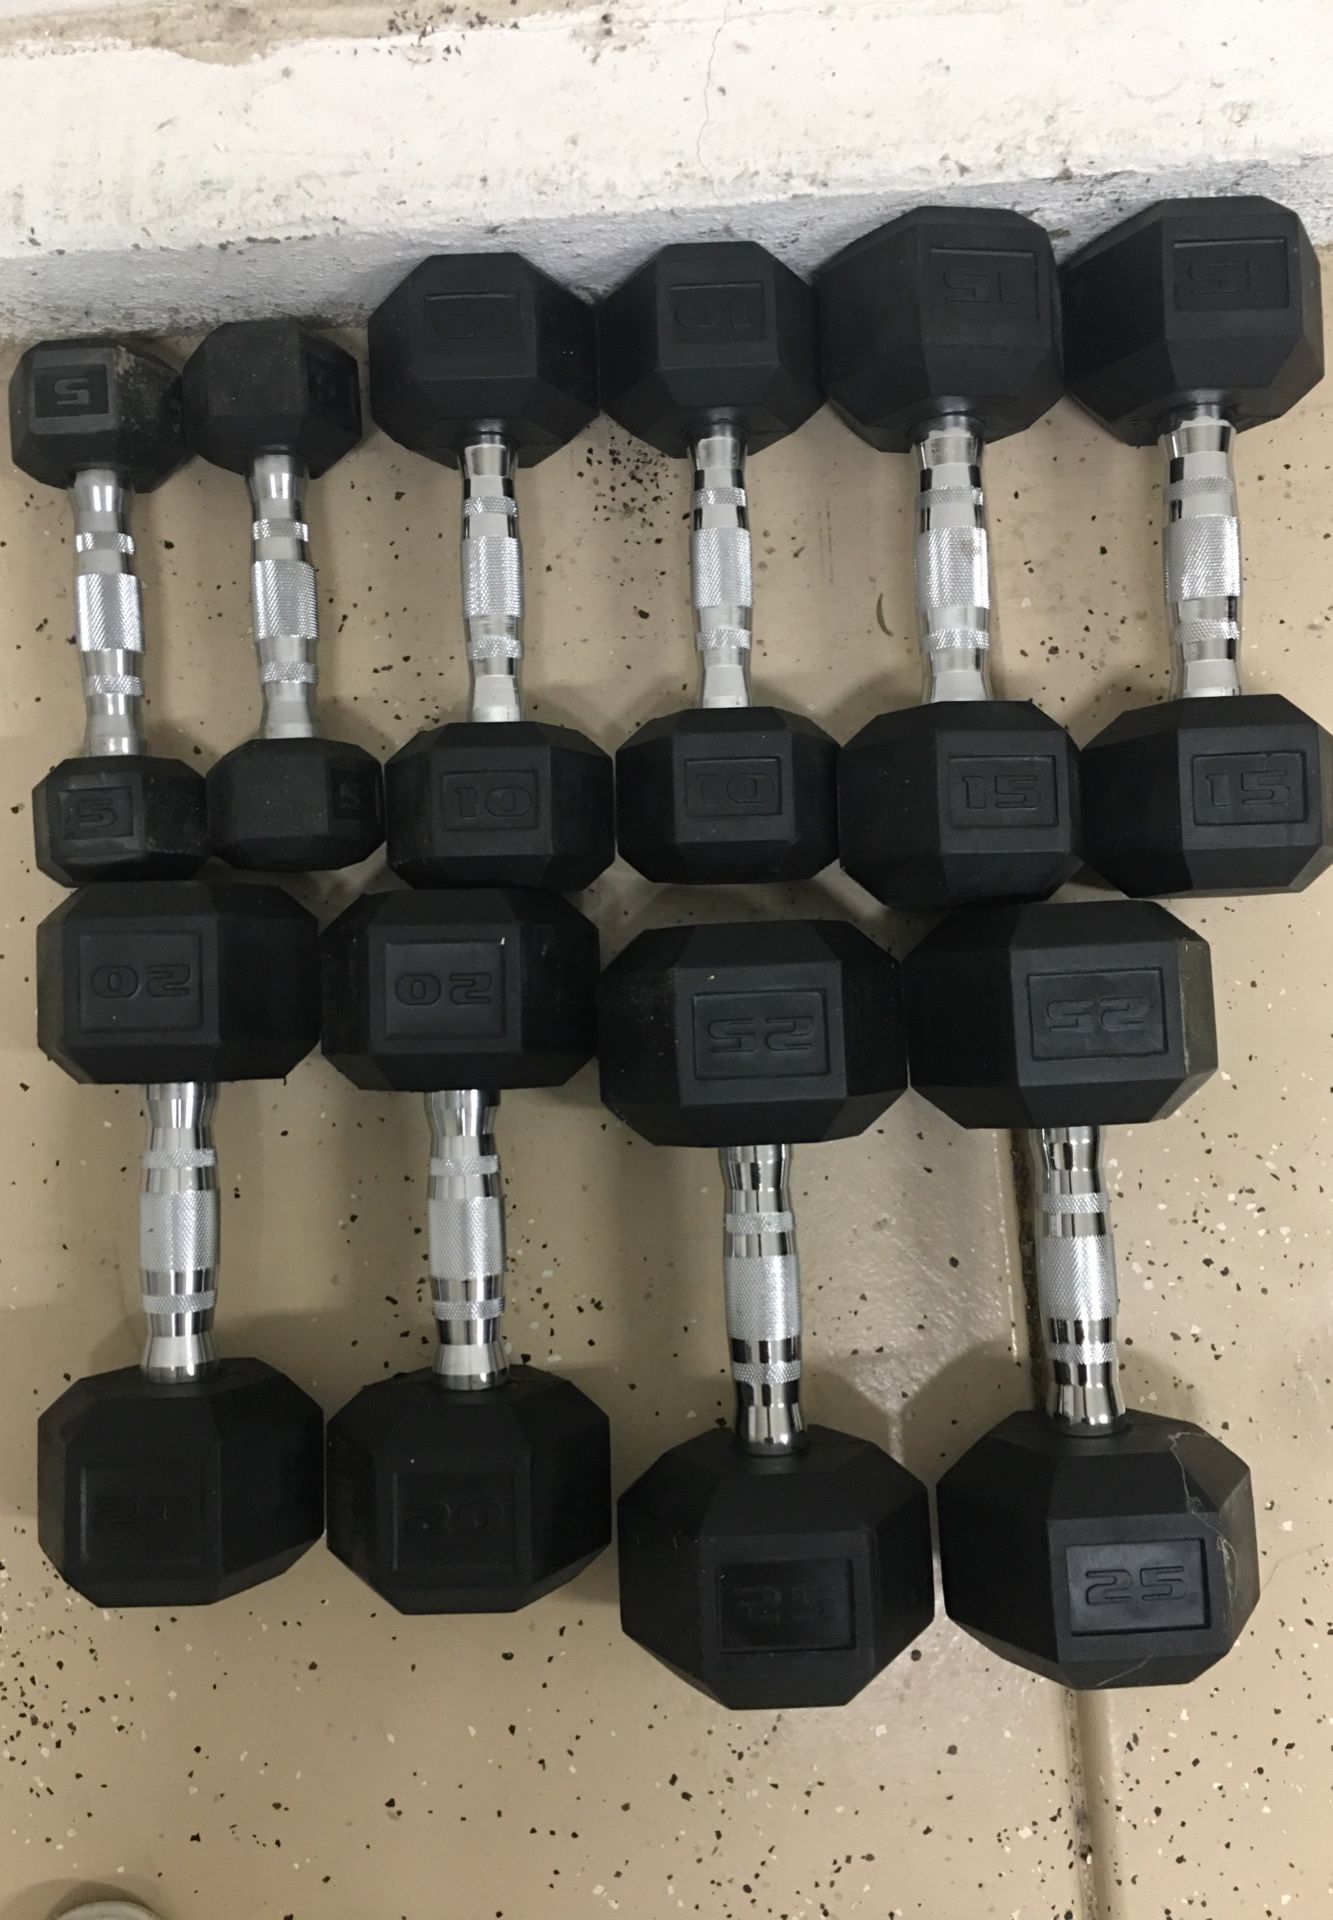 Polyurethane Dumbbells 5lbs to 25lbs in pairs.